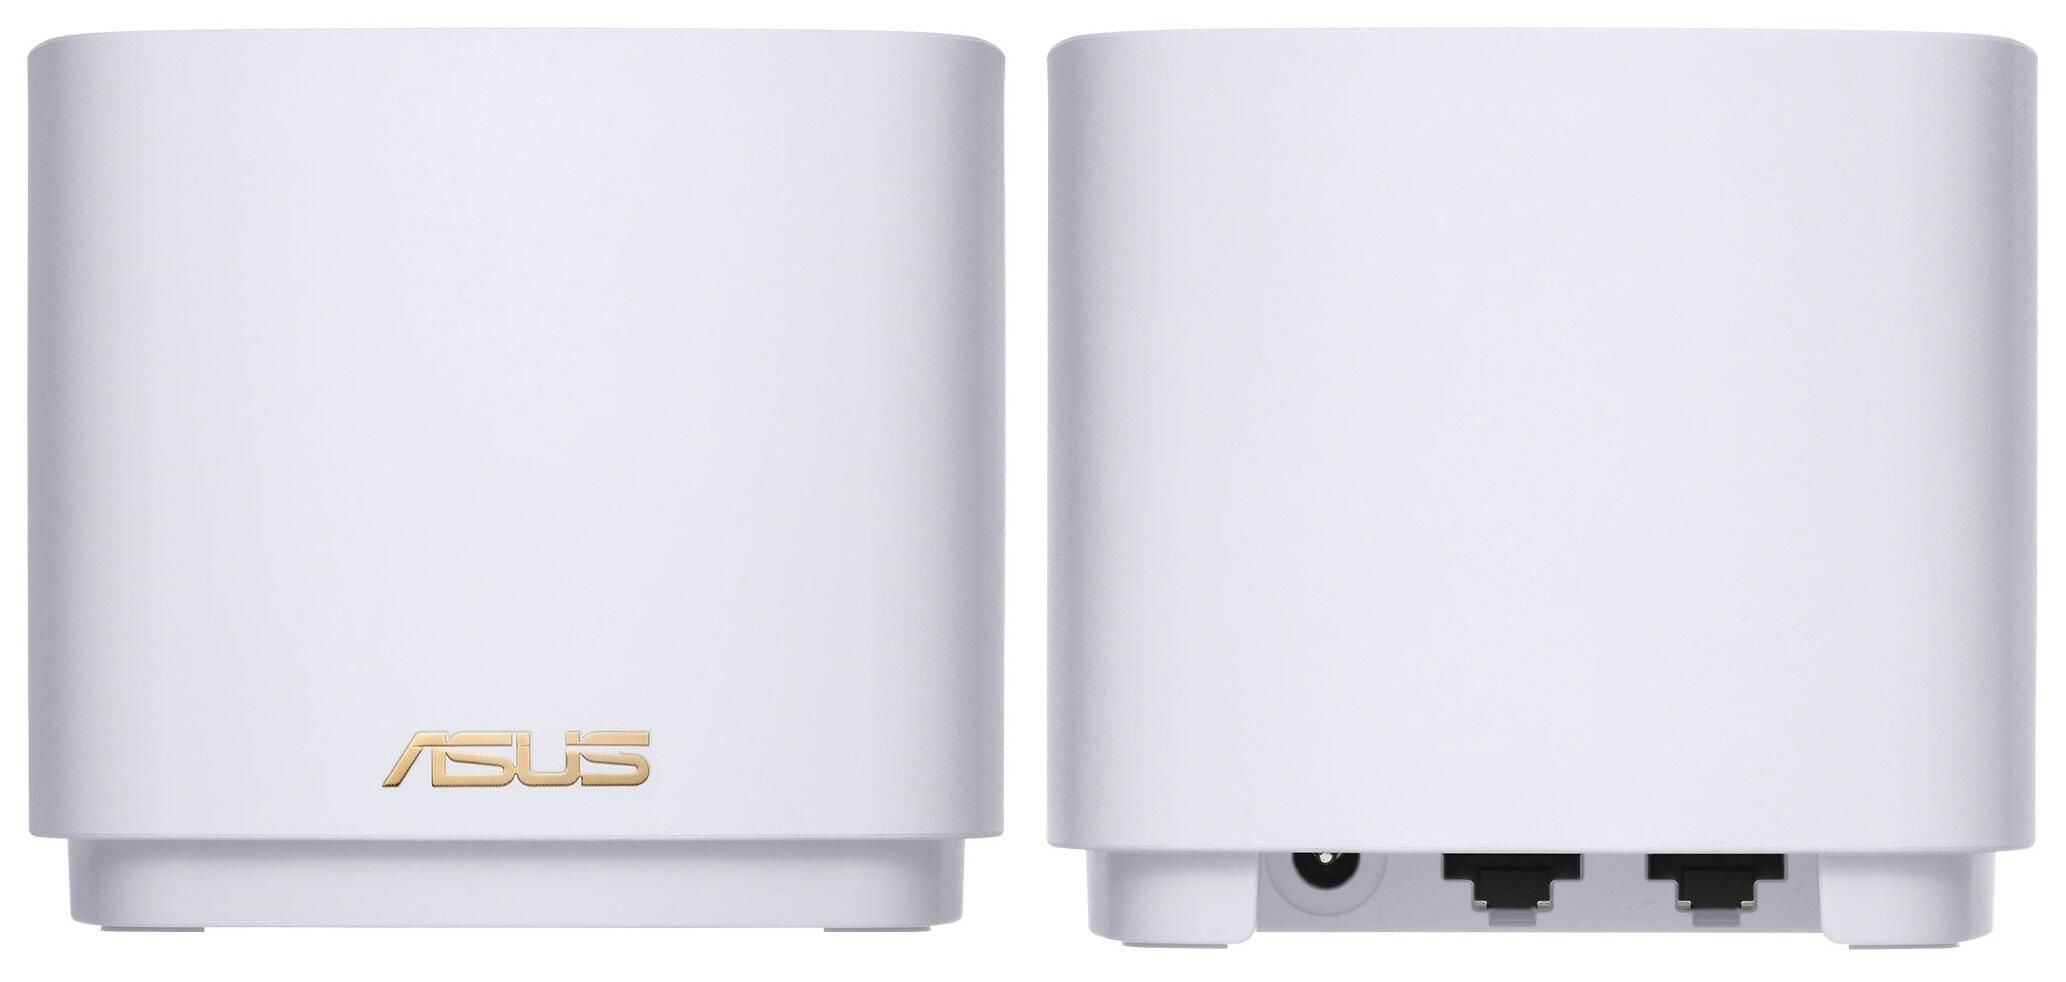 20200614.Asus-releases-a-3-piece-mesh-router-with-Wi-Fi-6-support-for-300-04.jpg